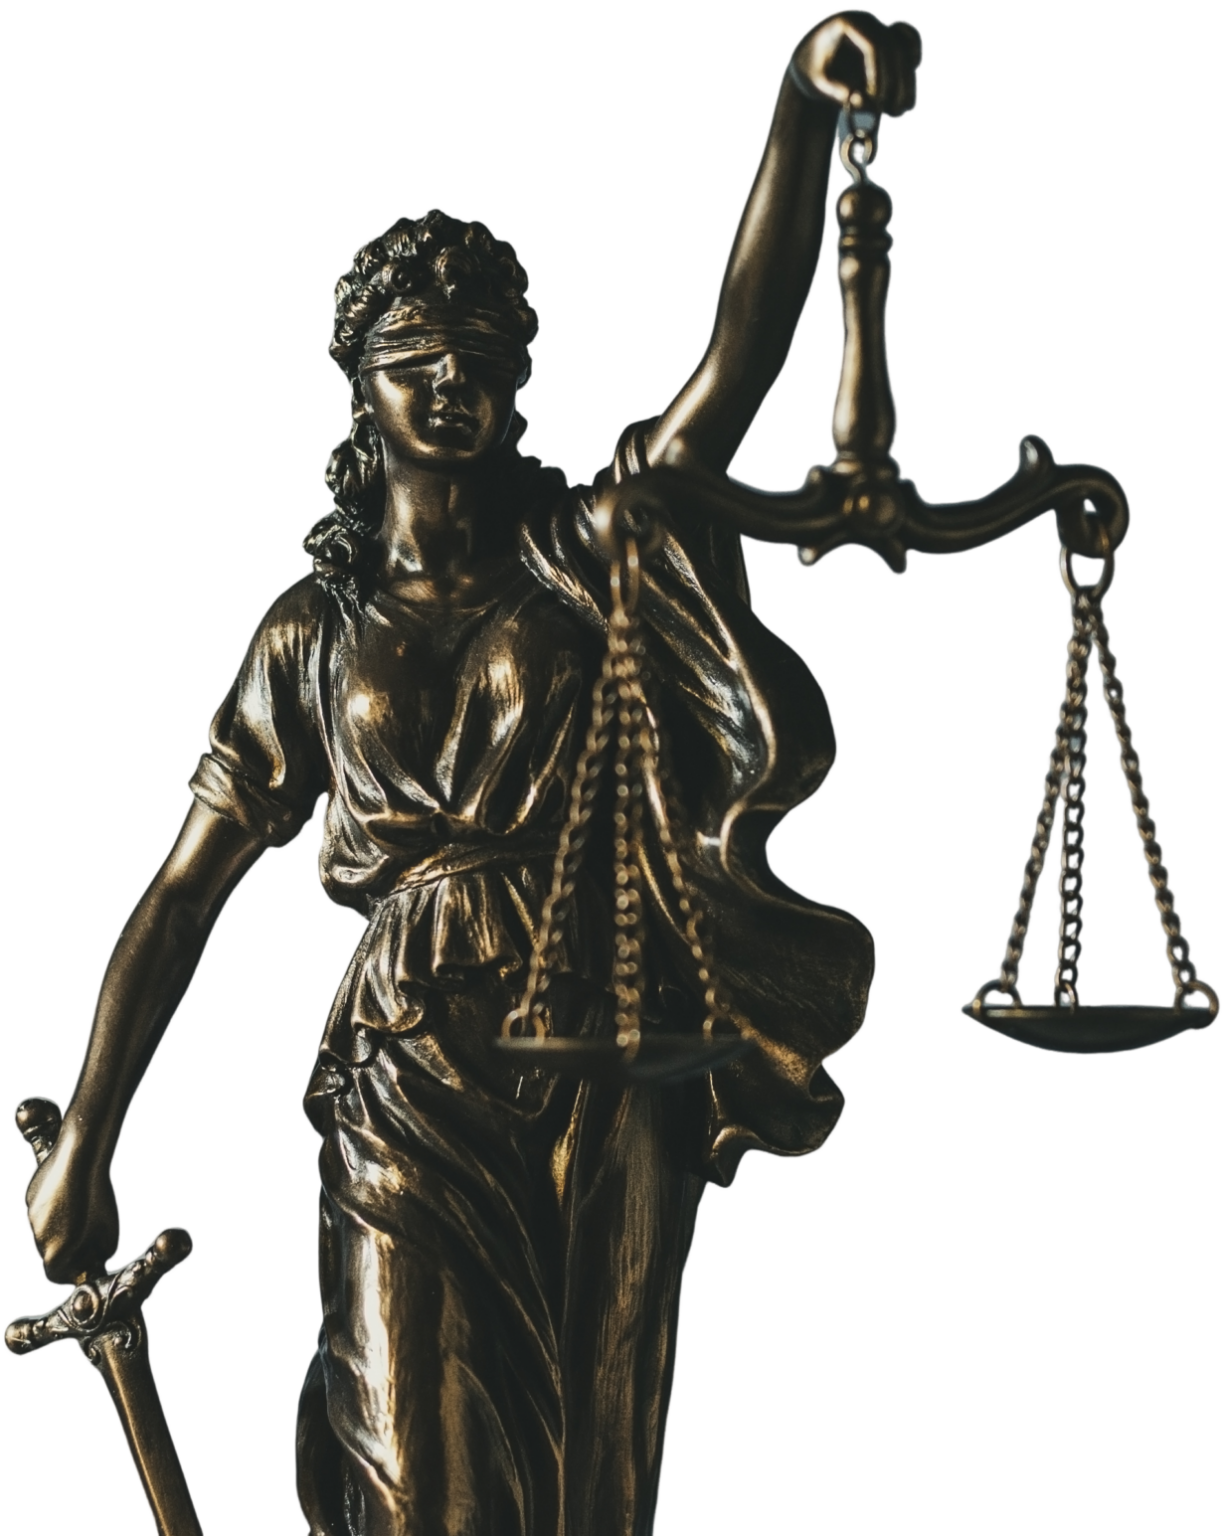 brass statue of justice holding scales and sword 2023 11 27 04 59 43 utc